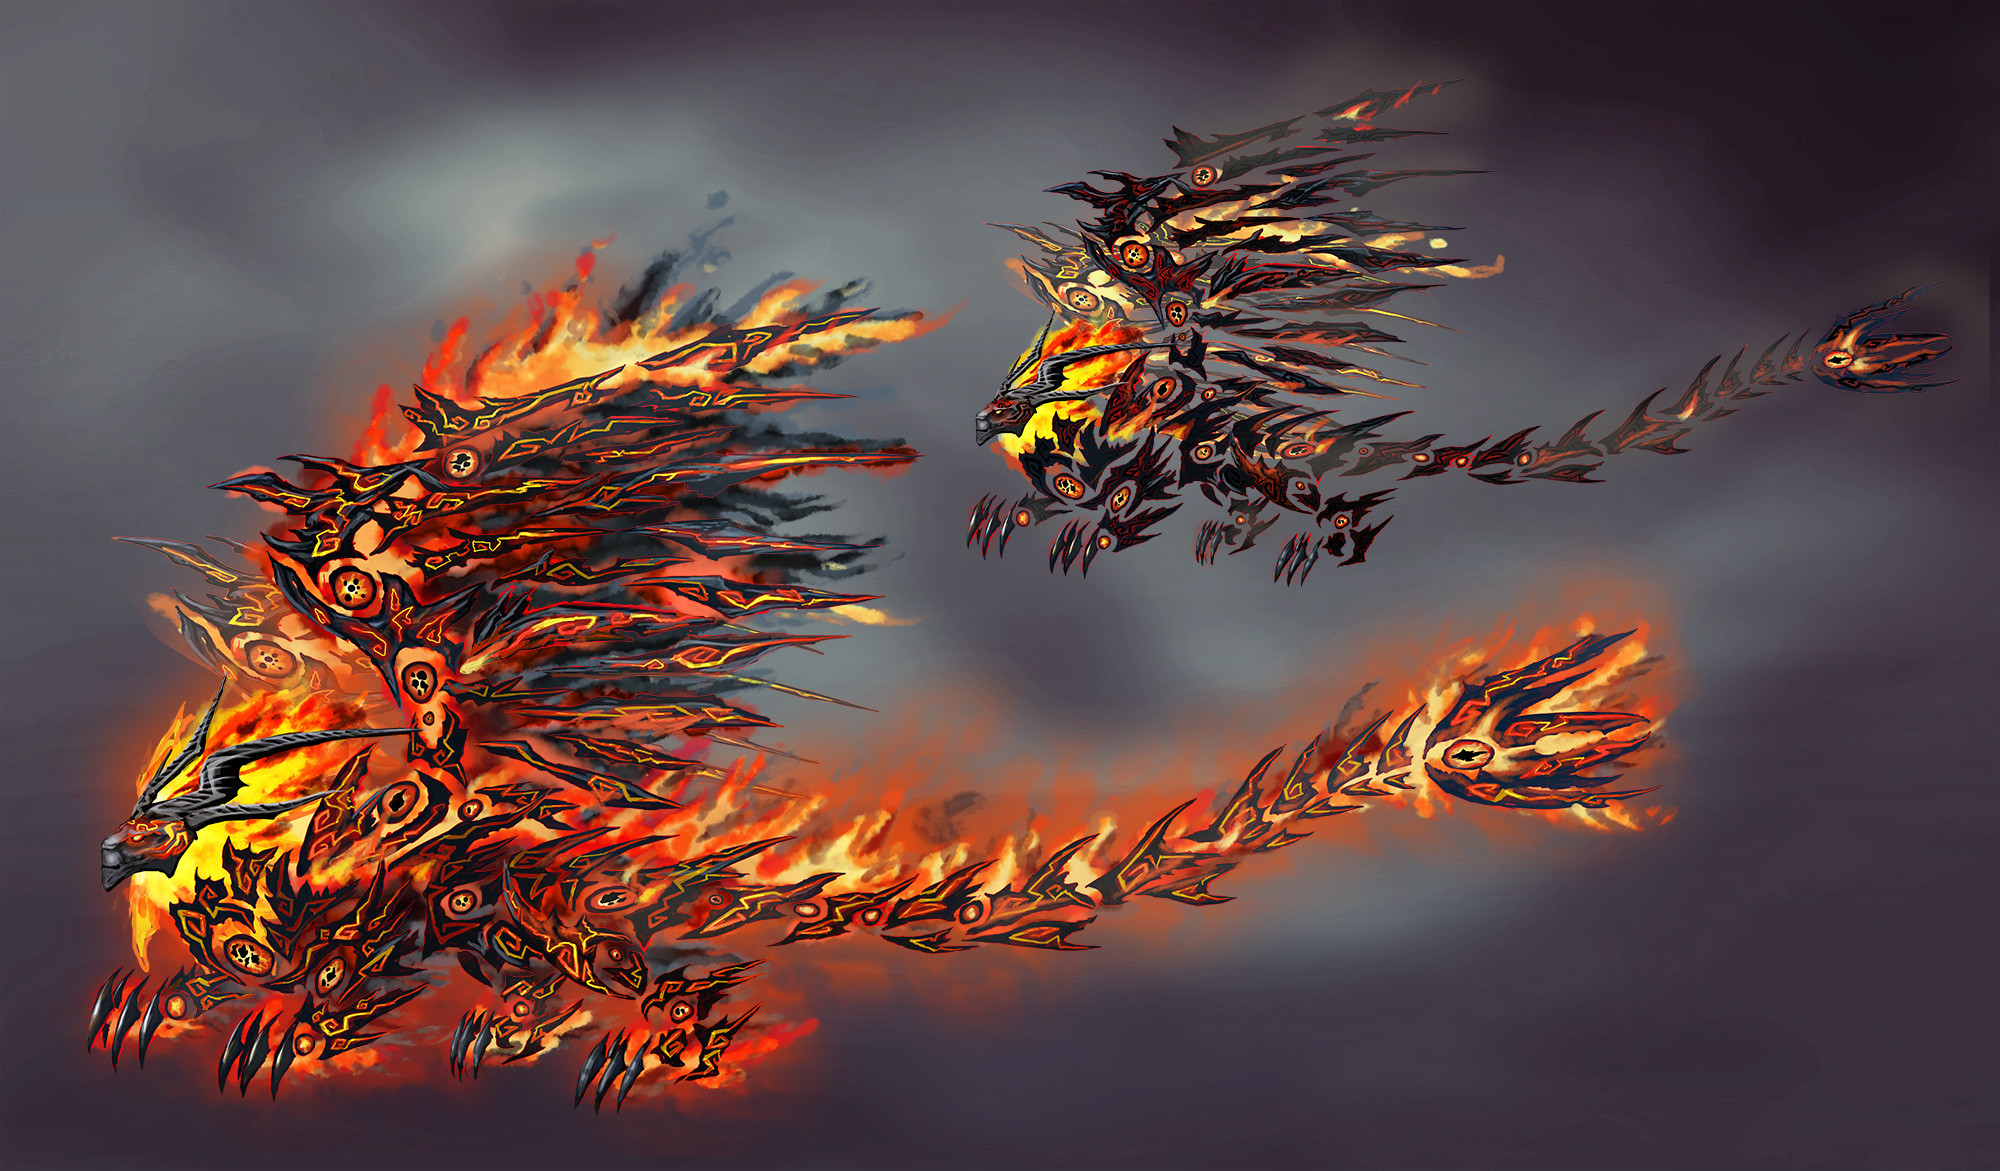 Final concept for the fire lion